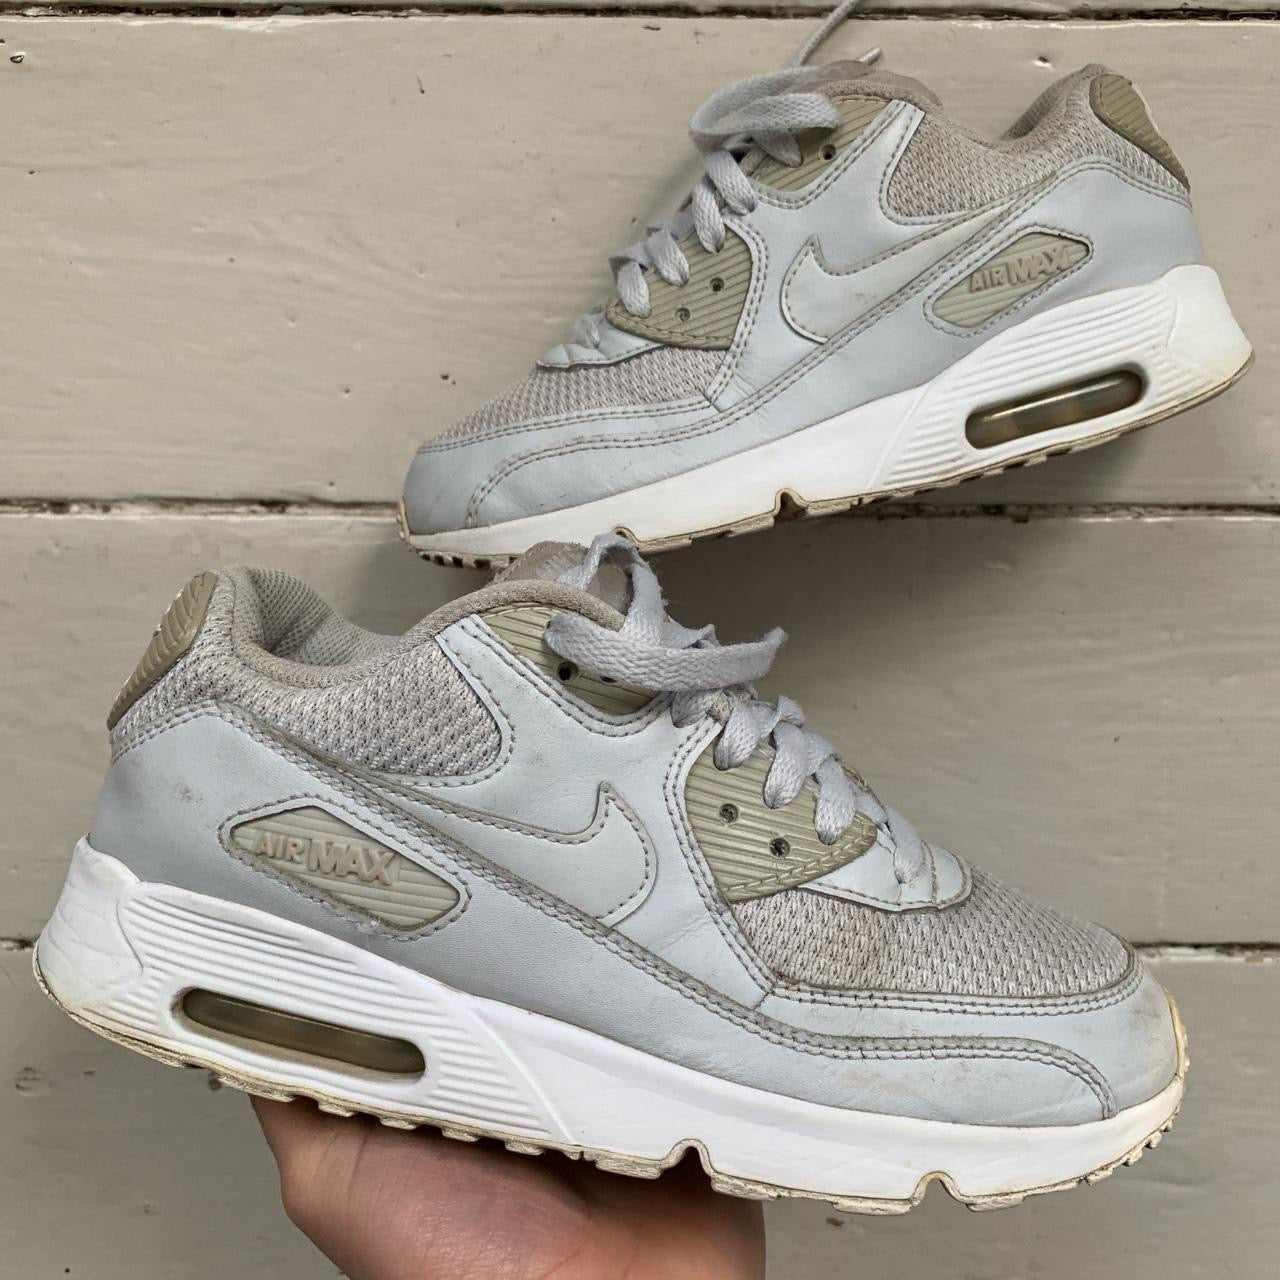 Nike Air Max 90 Silver and White (UK 5)